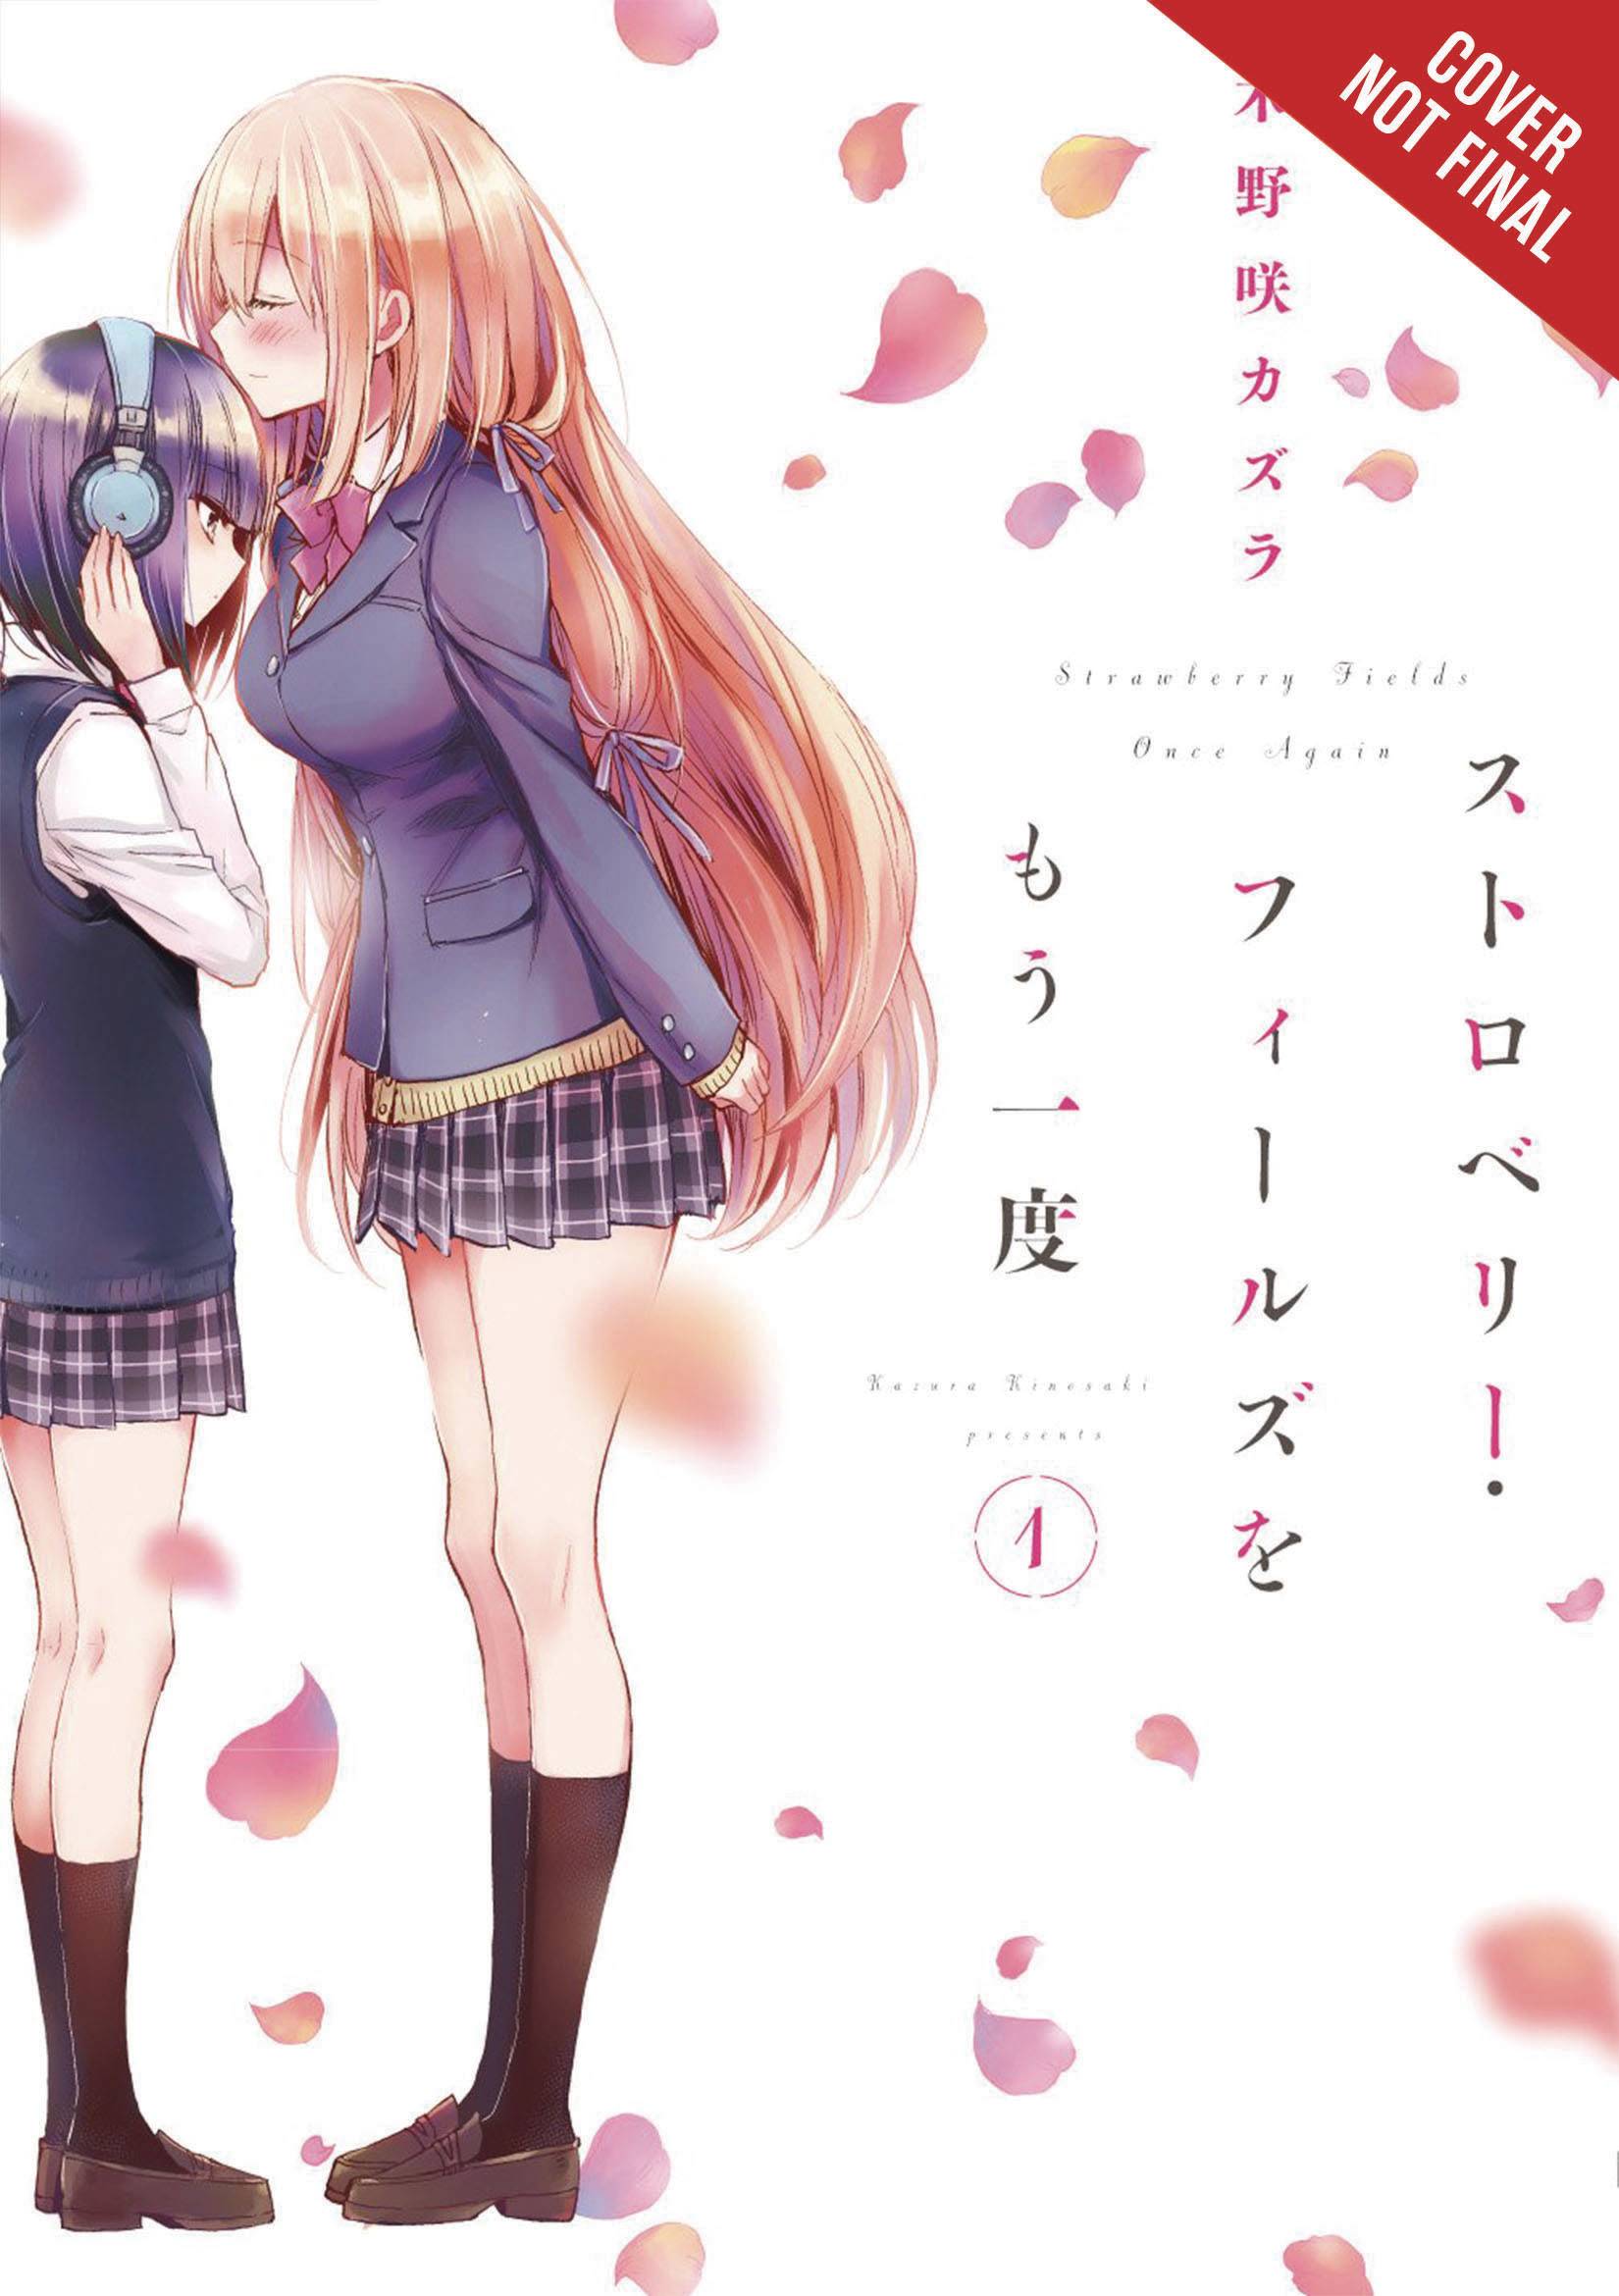 A girl with long blonde hair bends down to kiss a shorter, shyer girl with chinlength black hair and headphones. Both are wearing school uniforms. Cherry blossoms fall down around them.